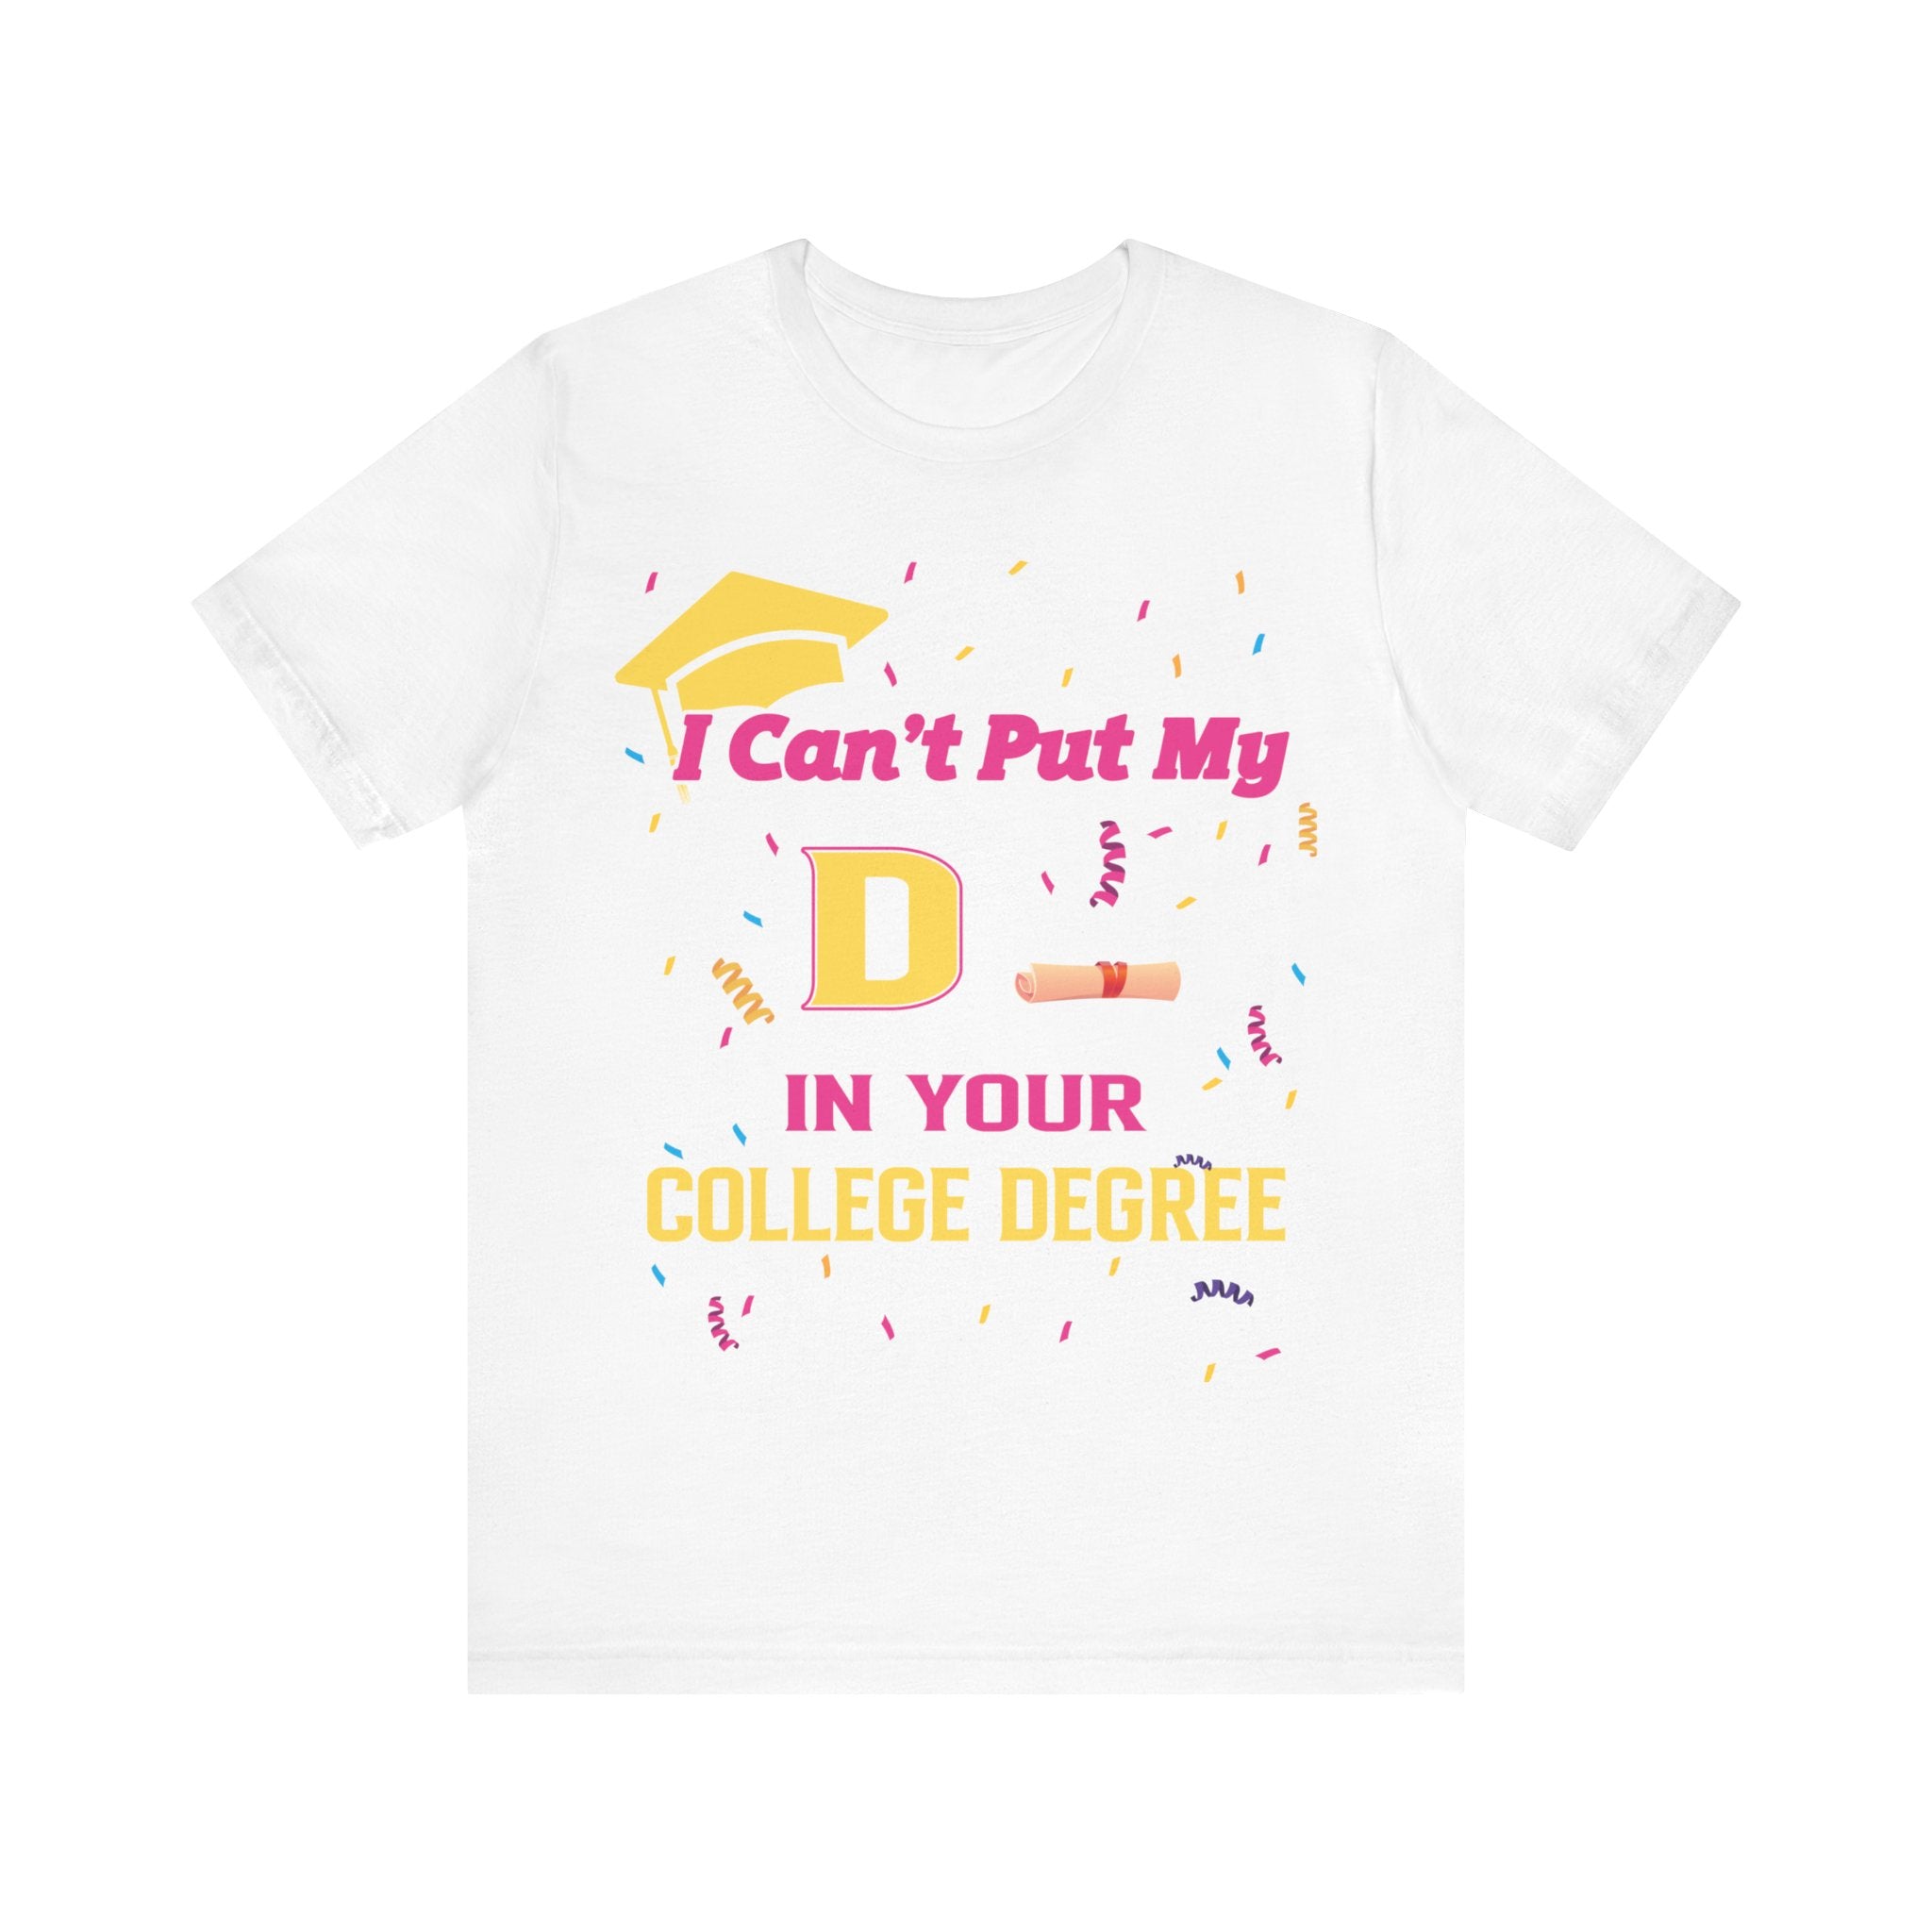 Can't Put My D - College Degree